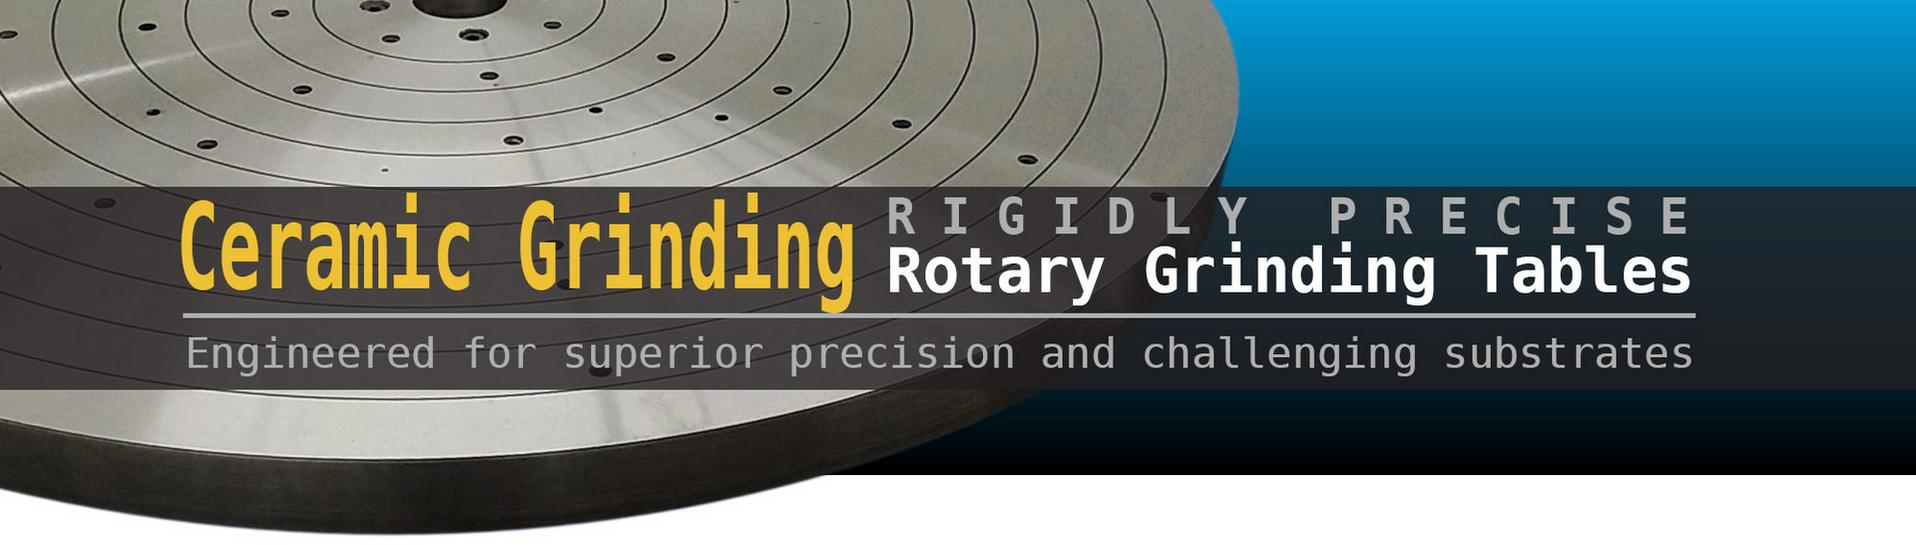 Banner graphic for Roto Tech representing ceramic rotary grinding